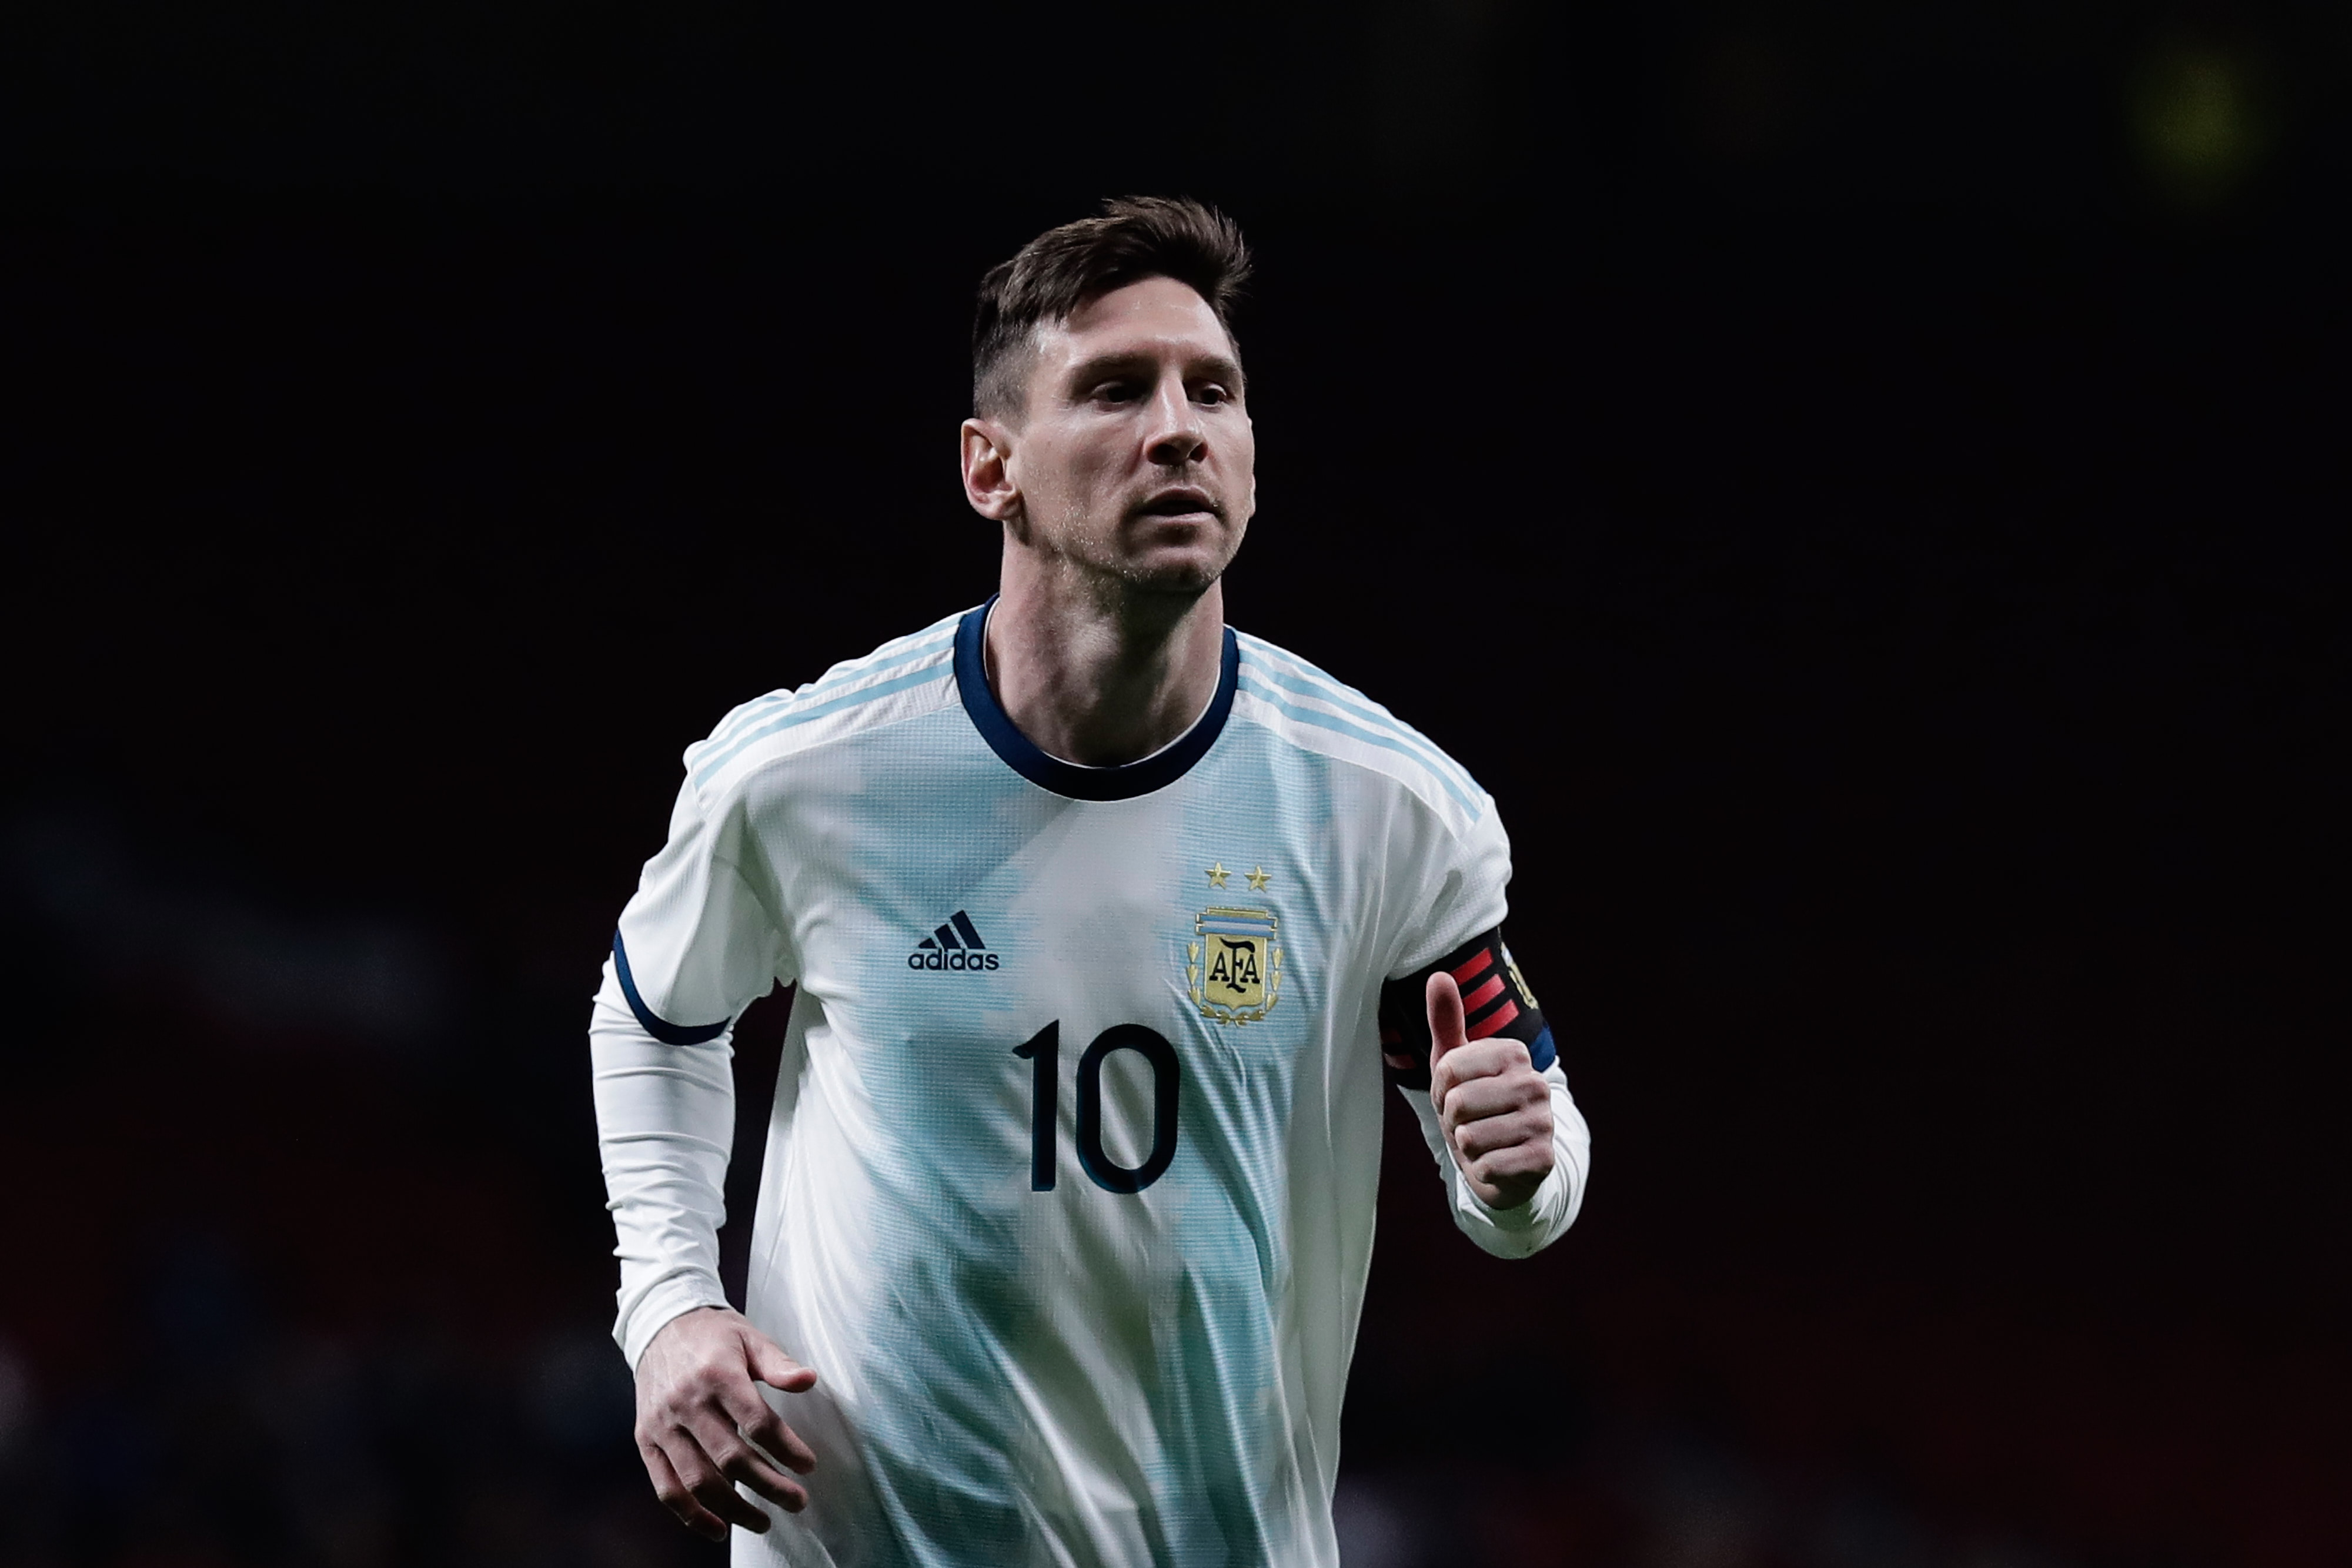 MADRID, SPAIN - MARCH 22: Lionel Messi reacts during the International Friendly match between Argentina and Venezuela at Estadio Wanda Metropolitano on March 22, 2019 in Madrid, Spain. (Photo by Gonzalo Arroyo Moreno/Getty Images) (Photo by Gonzalo Arroyo Moreno/Getty Images)